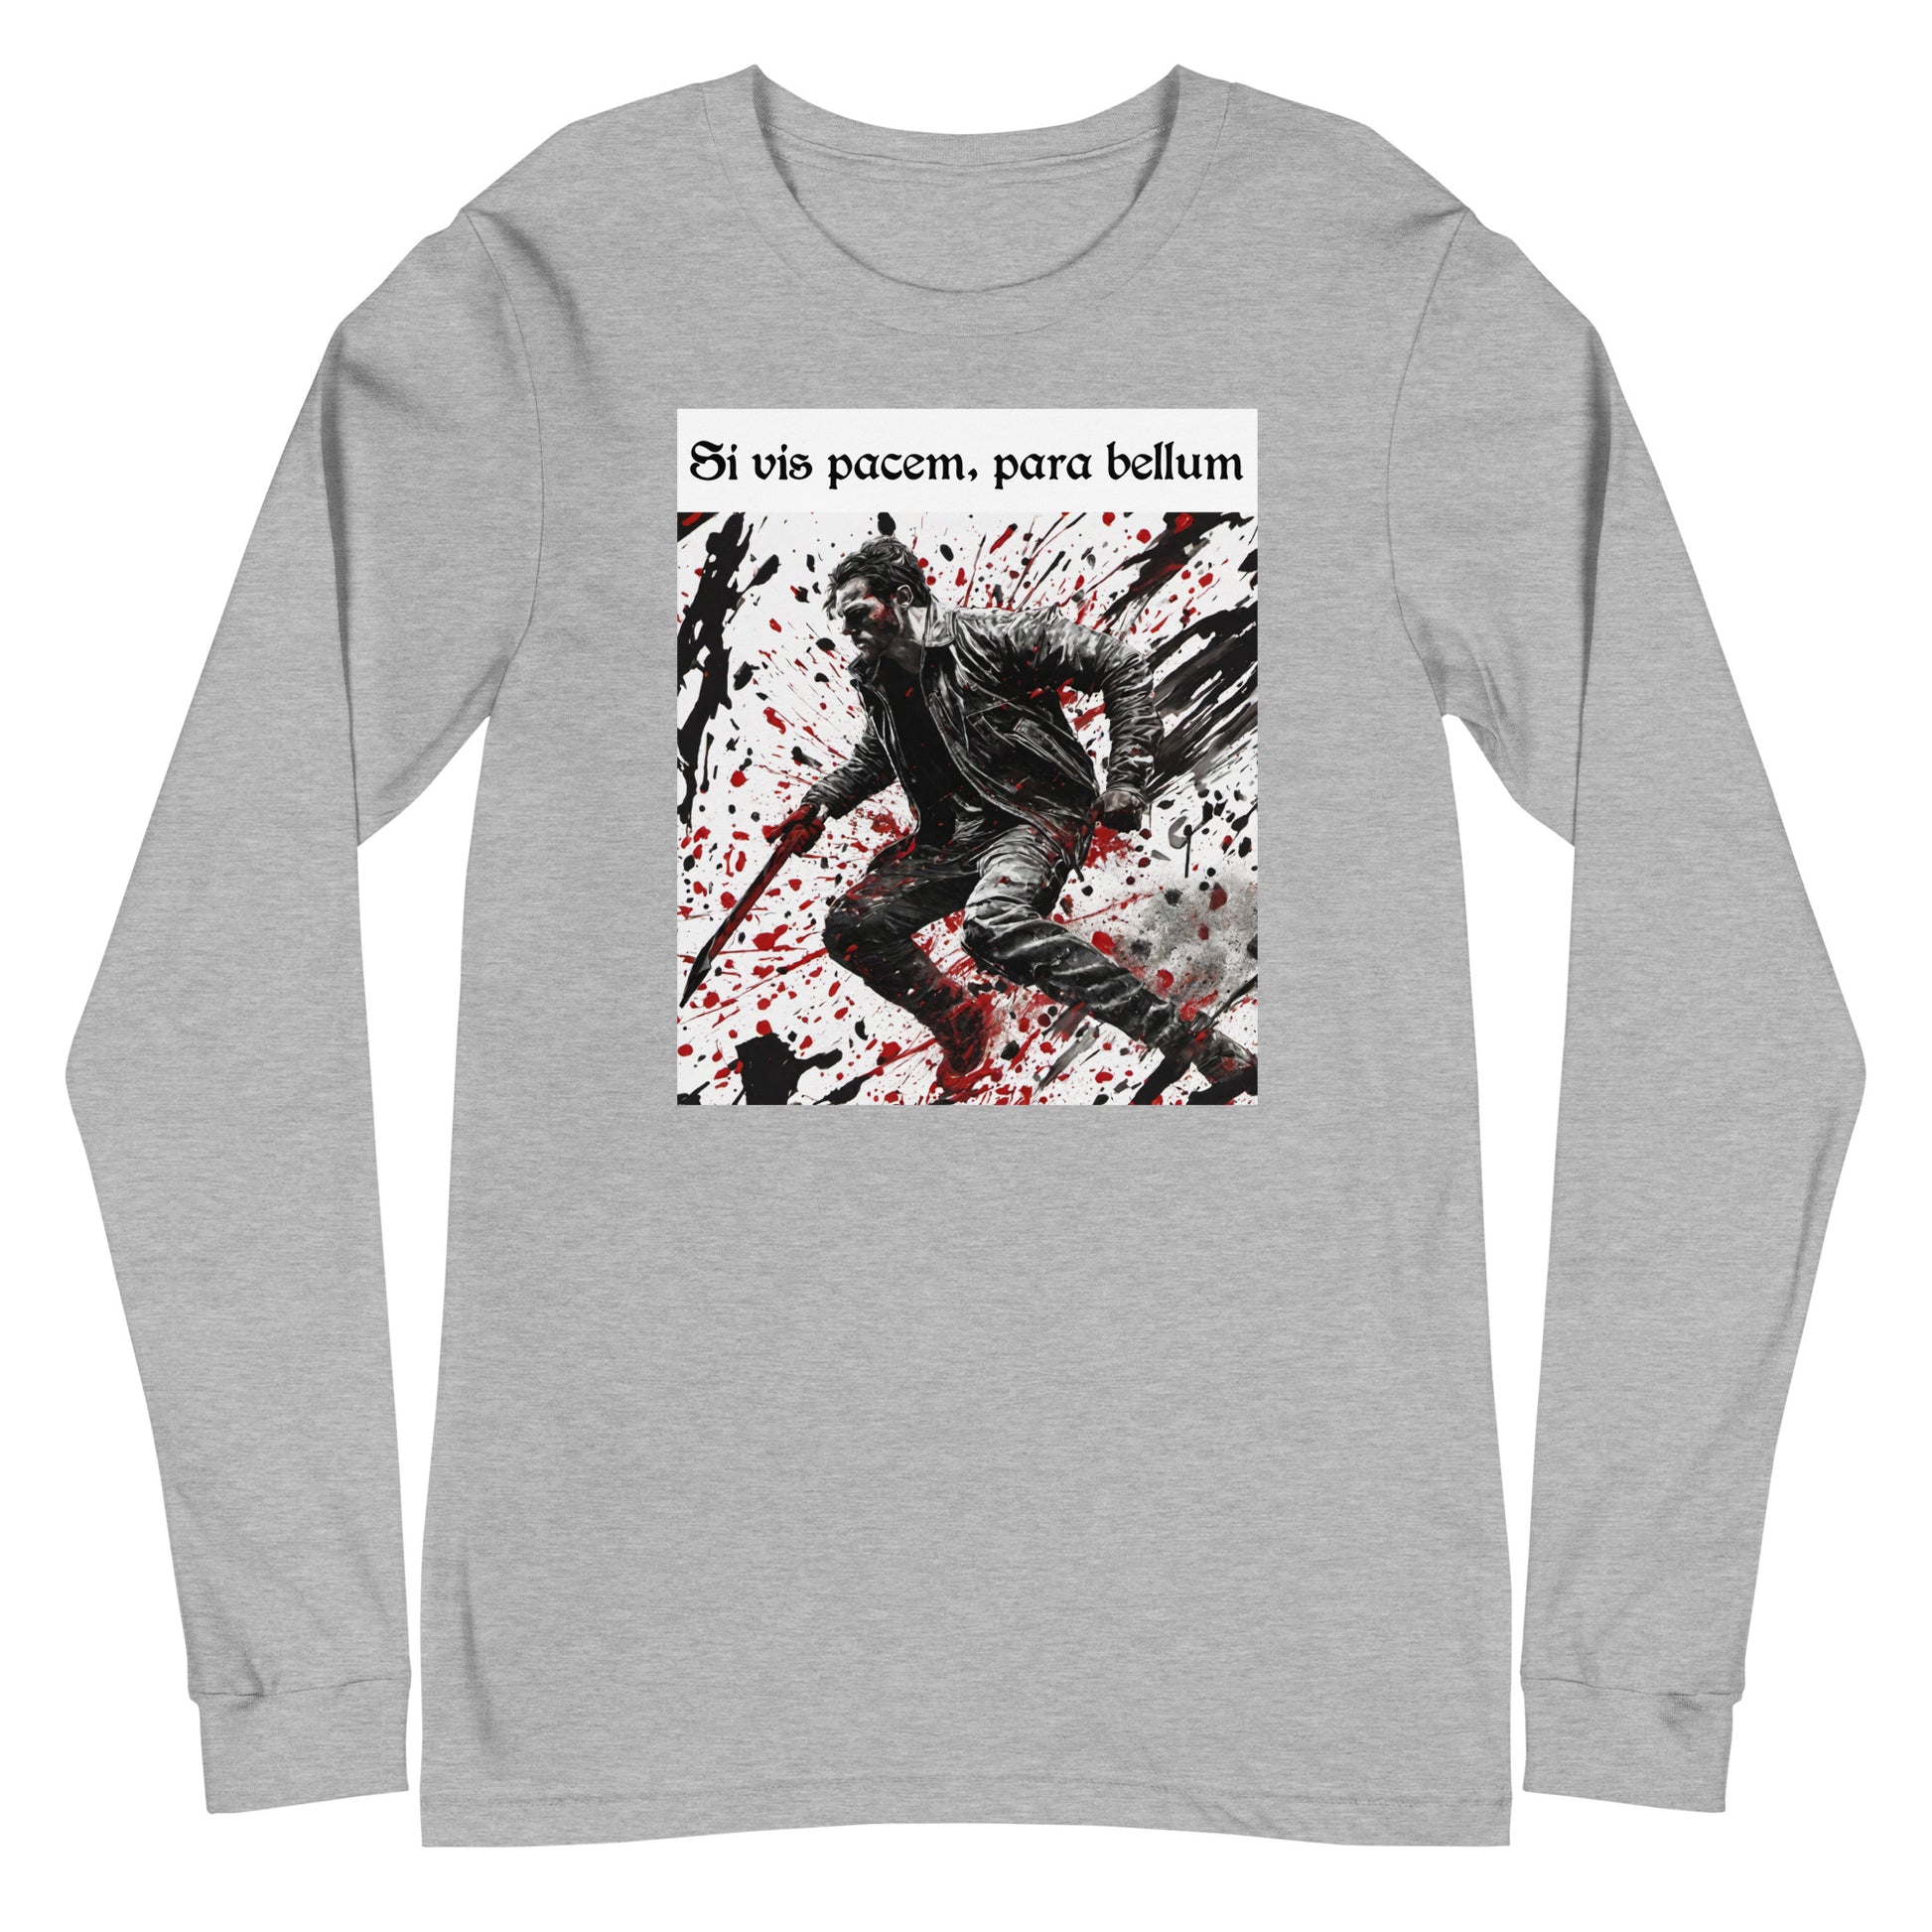 If You Want Peace, Prepare for War Men's Long Sleeve Tee Athletic Heather